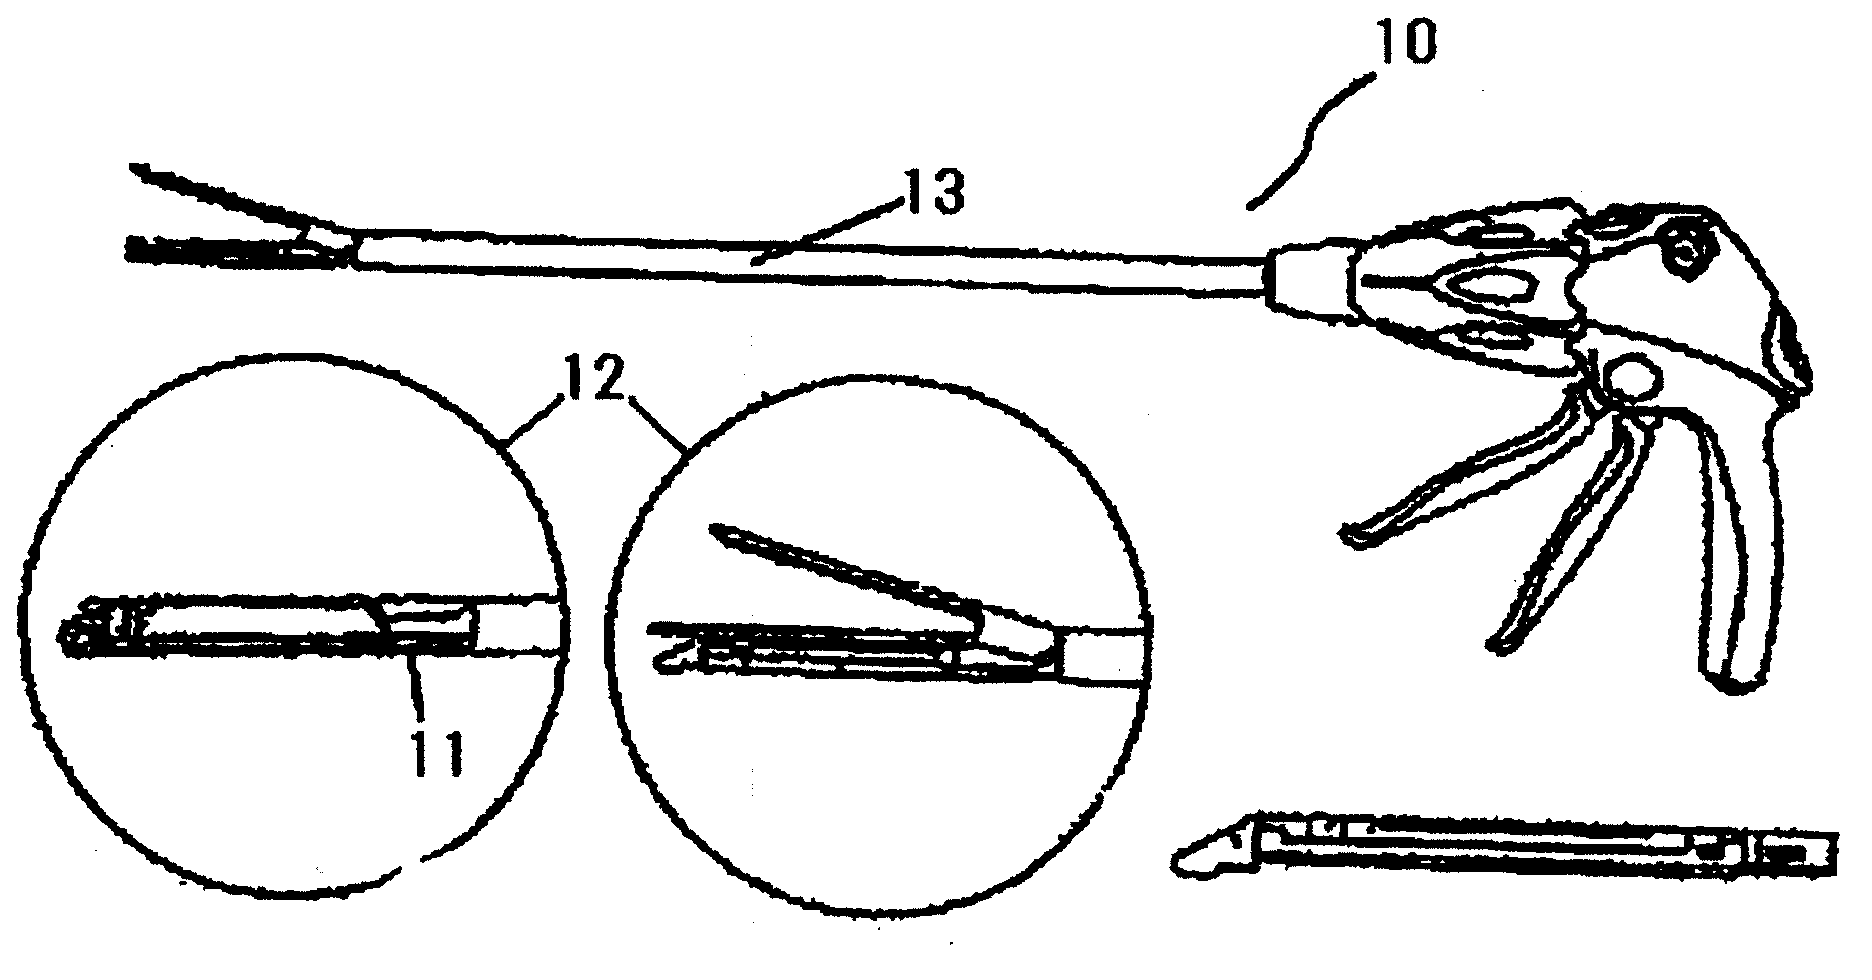 Suture reinforcing material being for use in automatic suturing devices and containing hydrophilic polymer